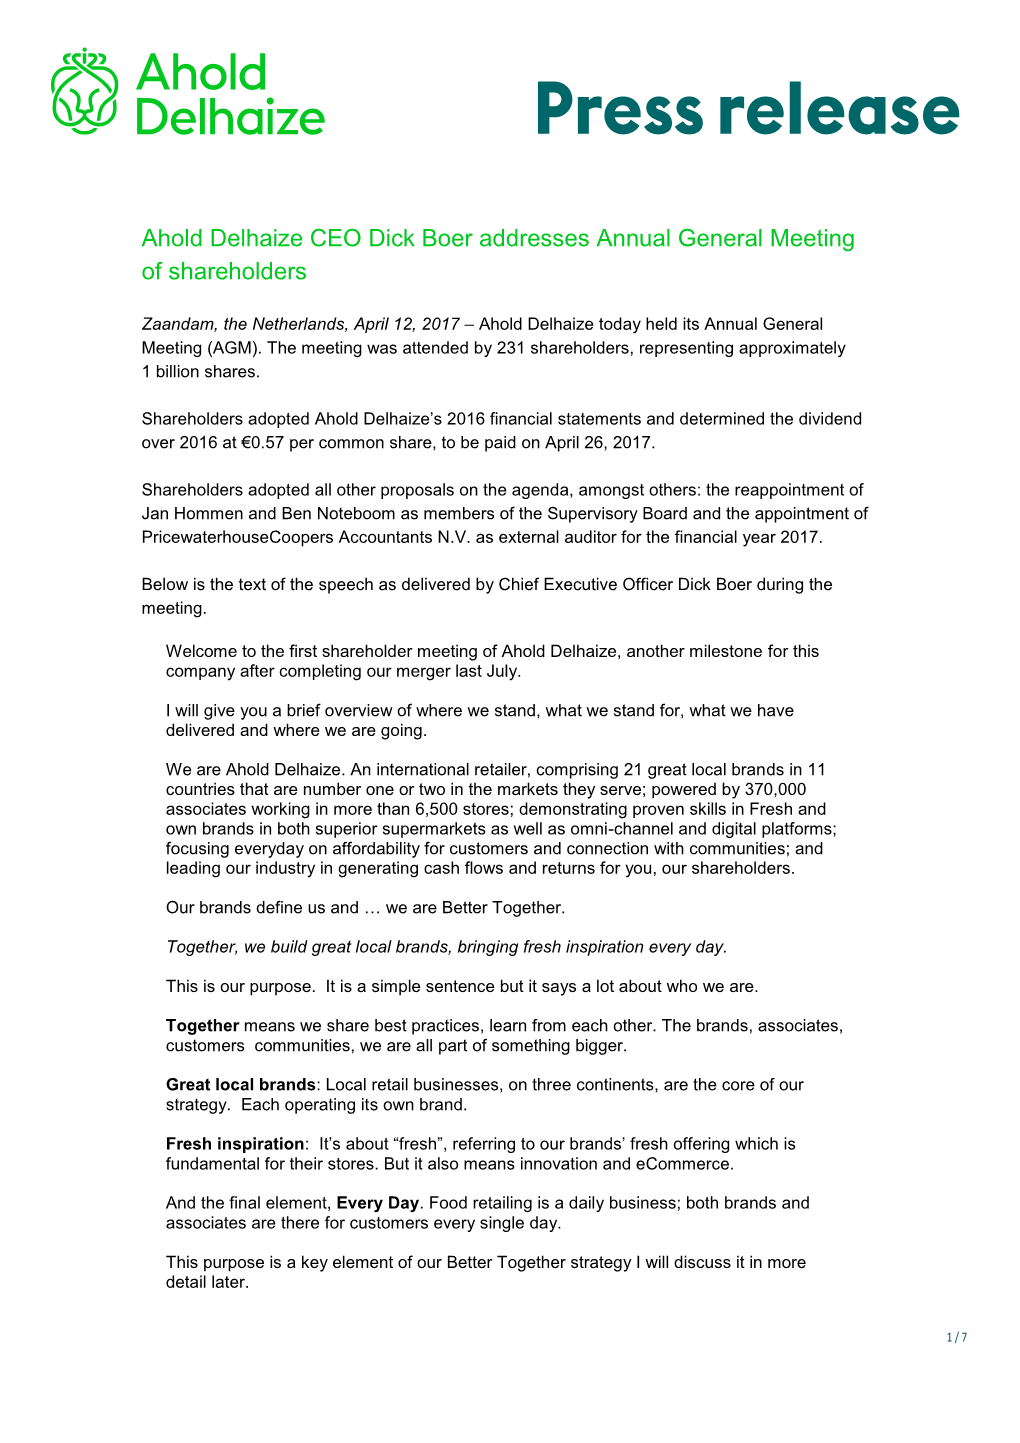 Ahold Delhaize CEO Dick Boer Addresses Annual General Meeting of Shareholders